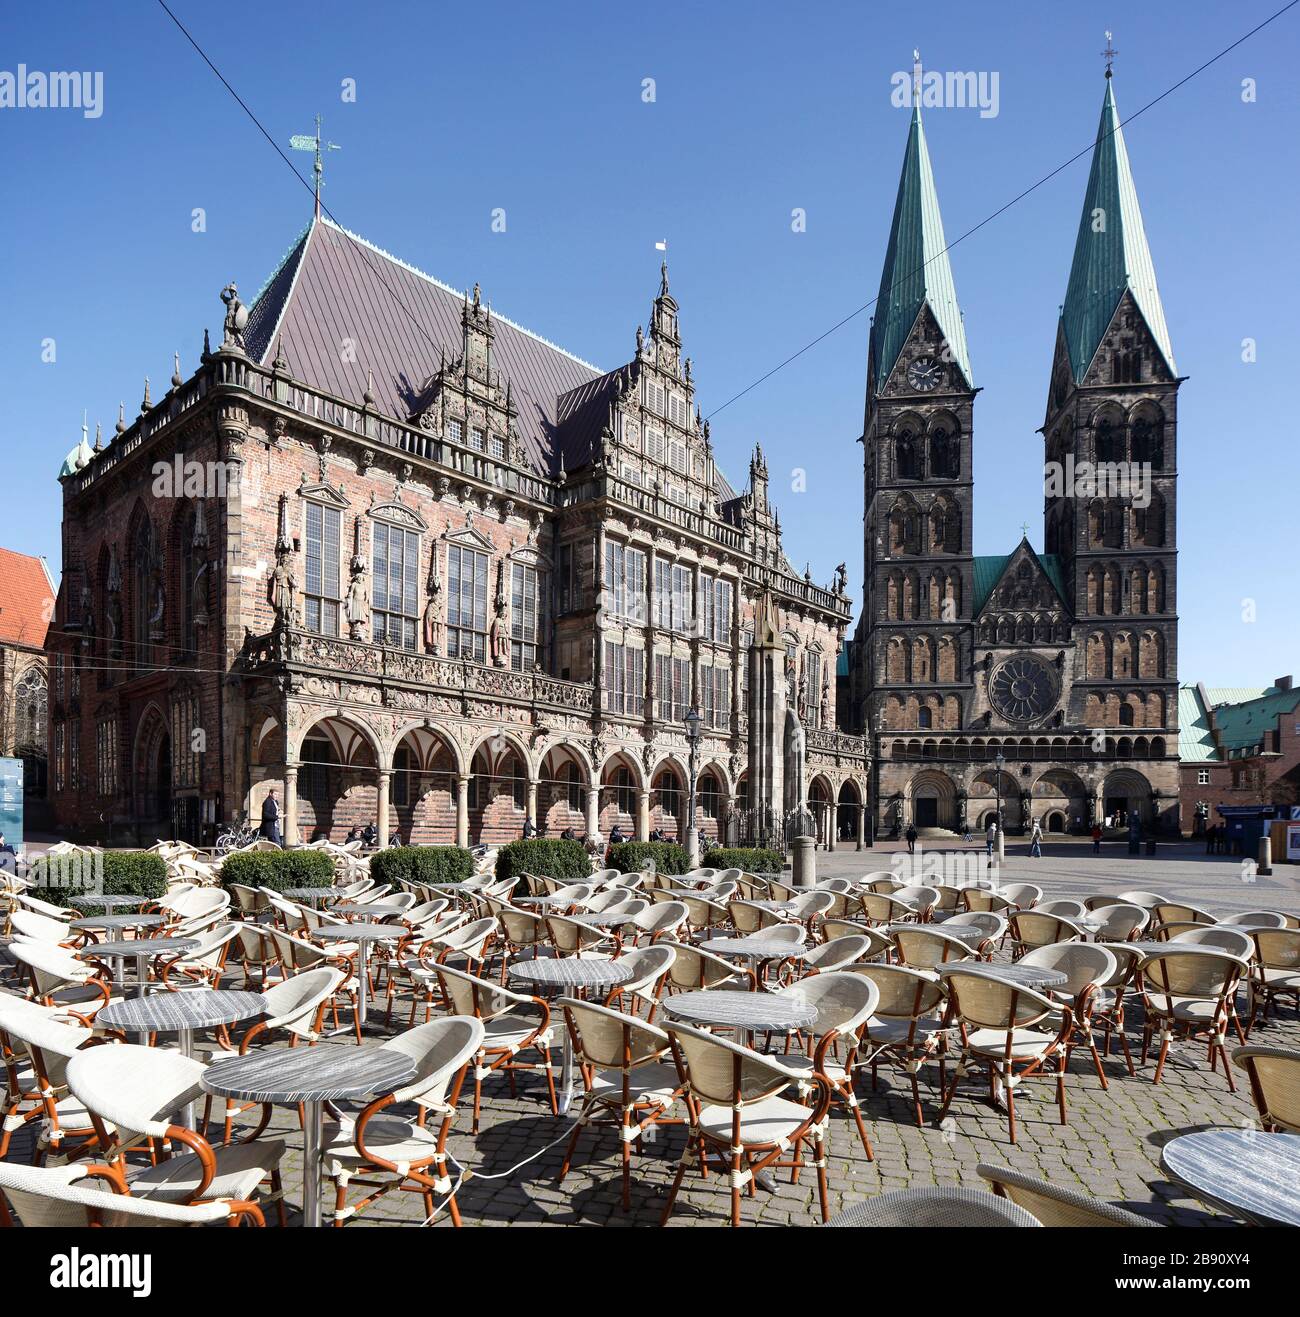 Empty chairs and tables of a cafe on Bremen's market square, closed due to corona virus, Bremen, Germany, Europe Stock Photo